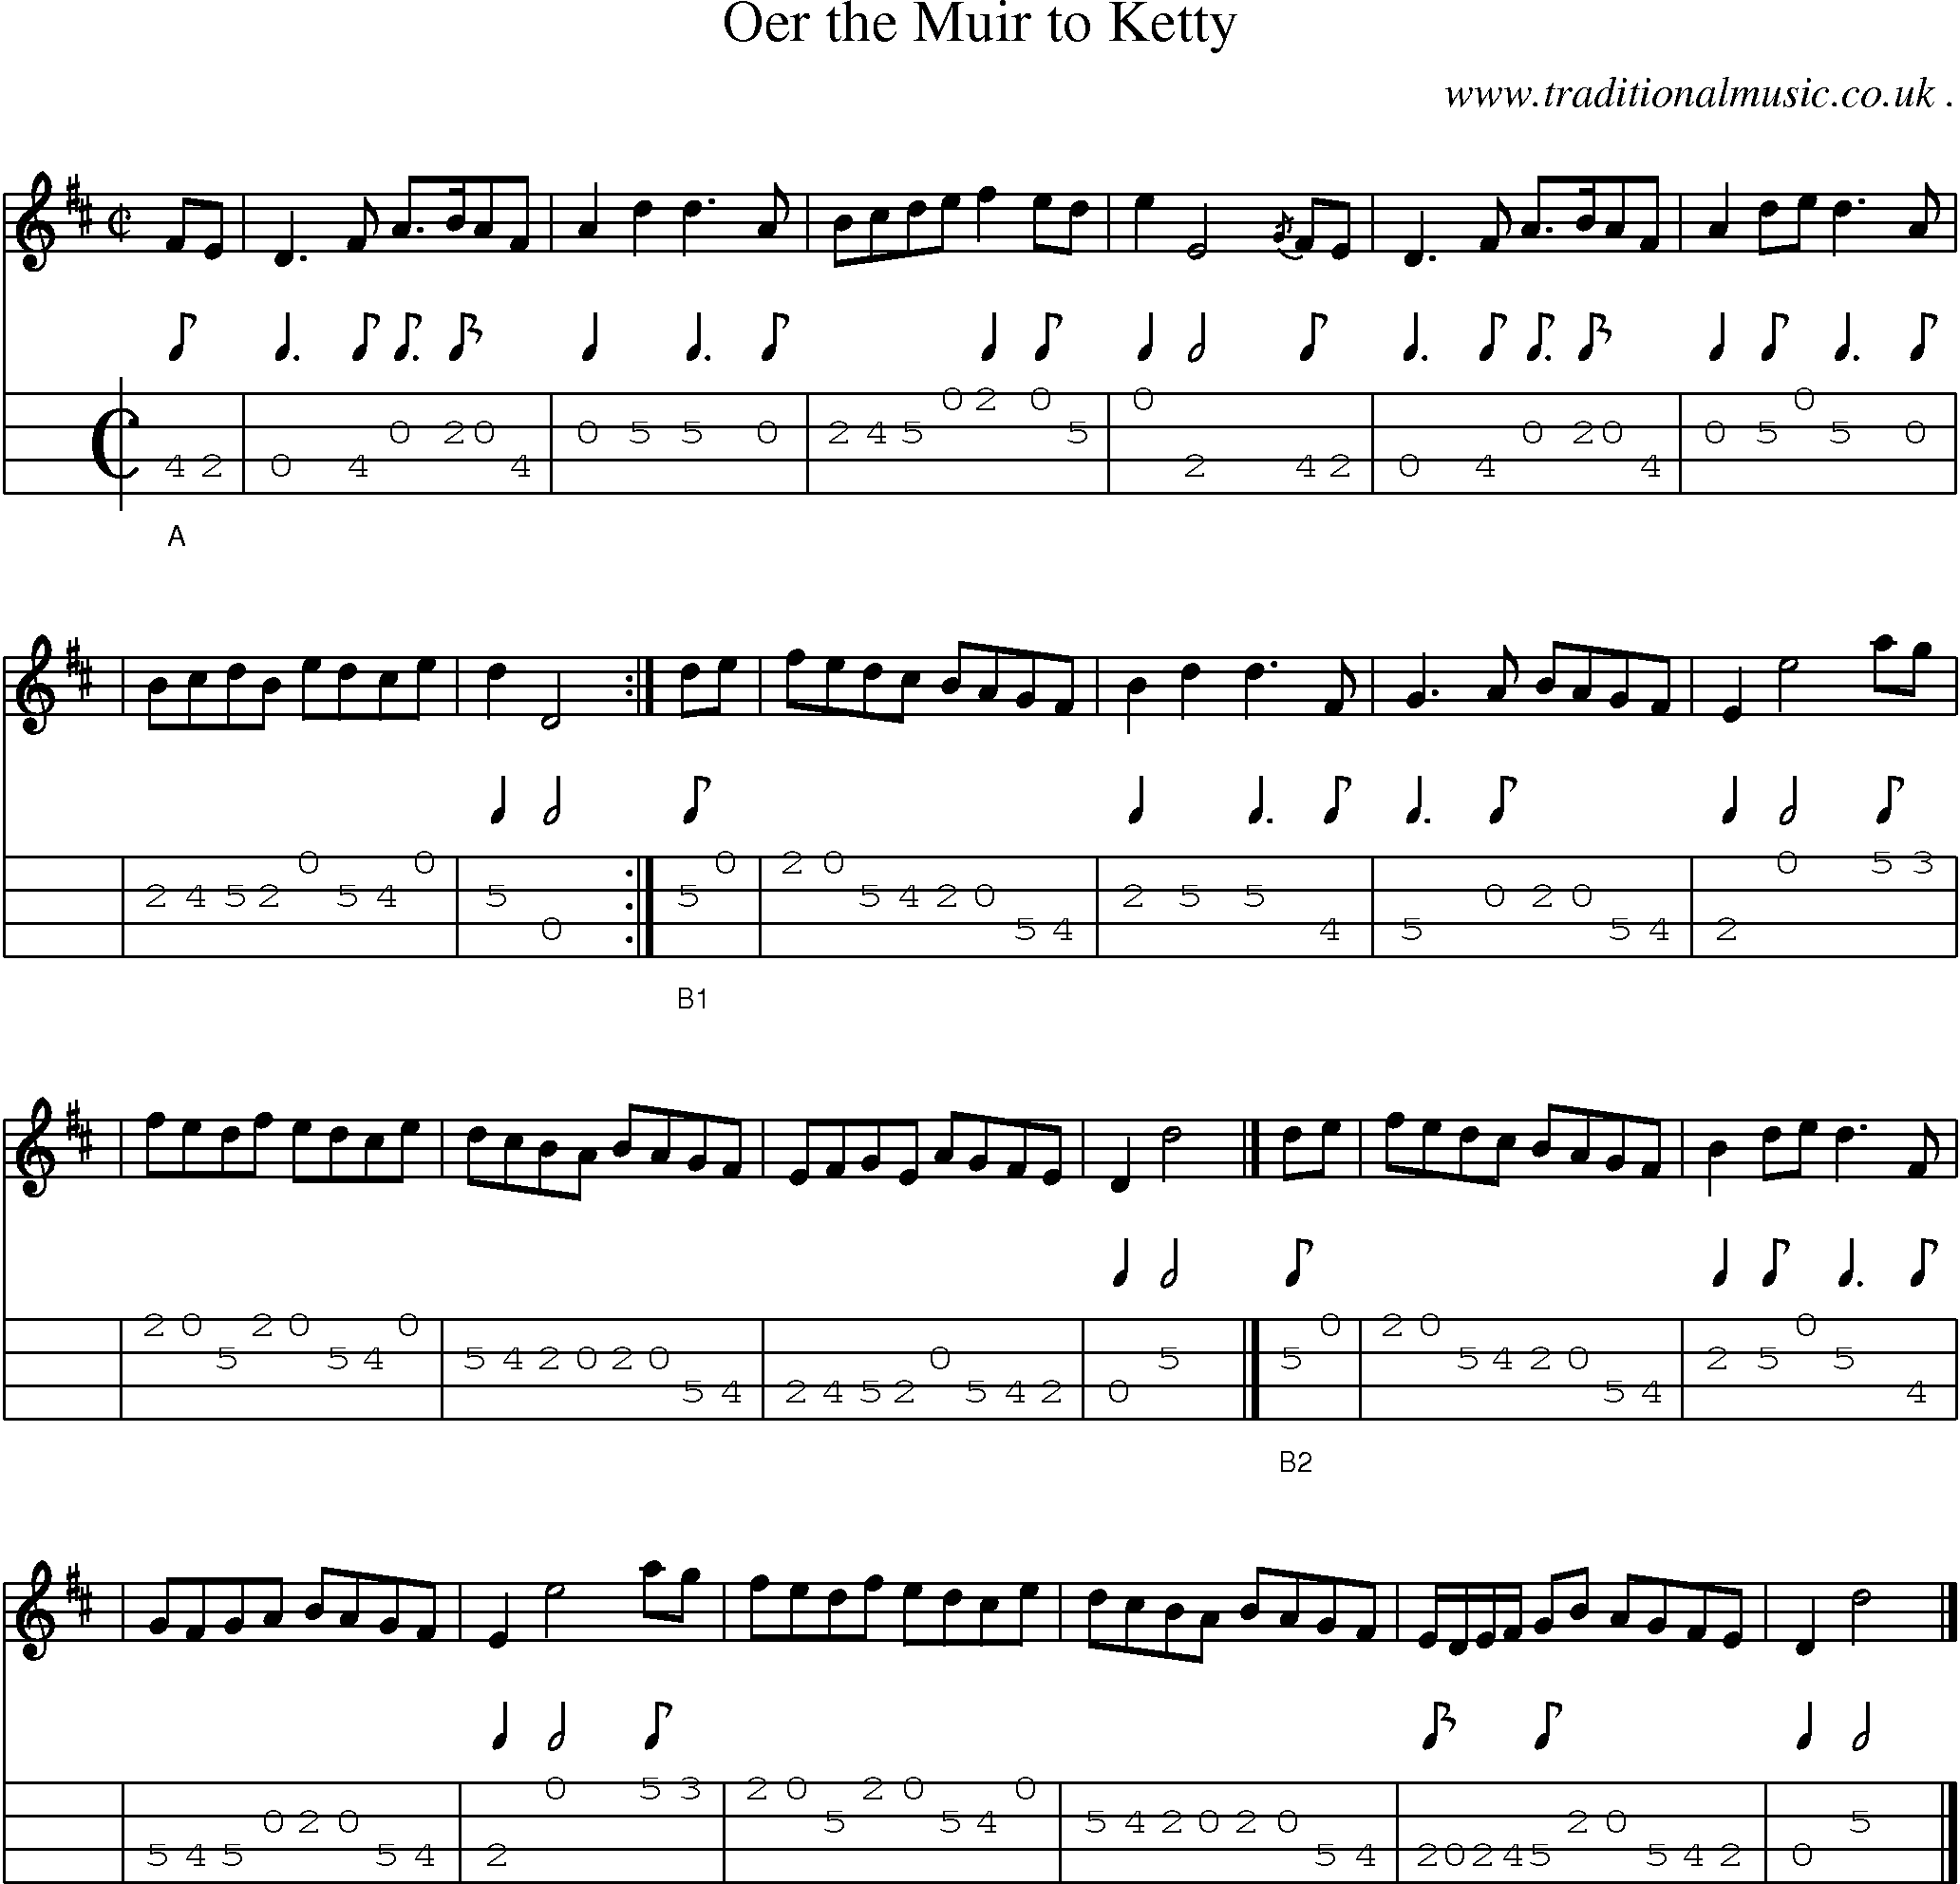 Sheet-music  score, Chords and Mandolin Tabs for Oer The Muir To Ketty